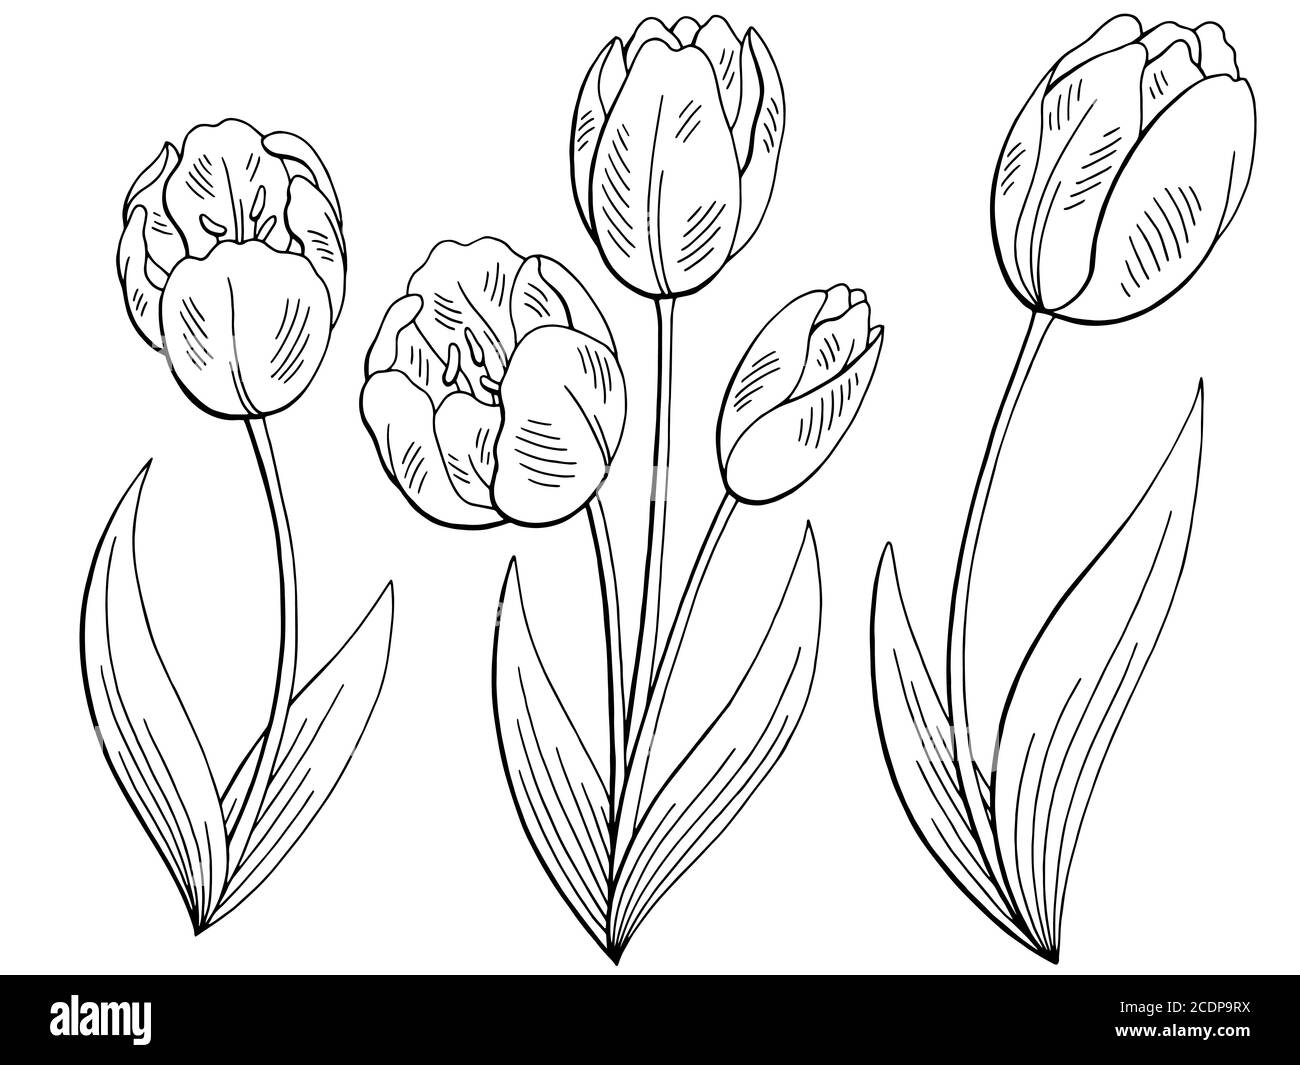 Tulip graphic Stock Vector Images - Alamy